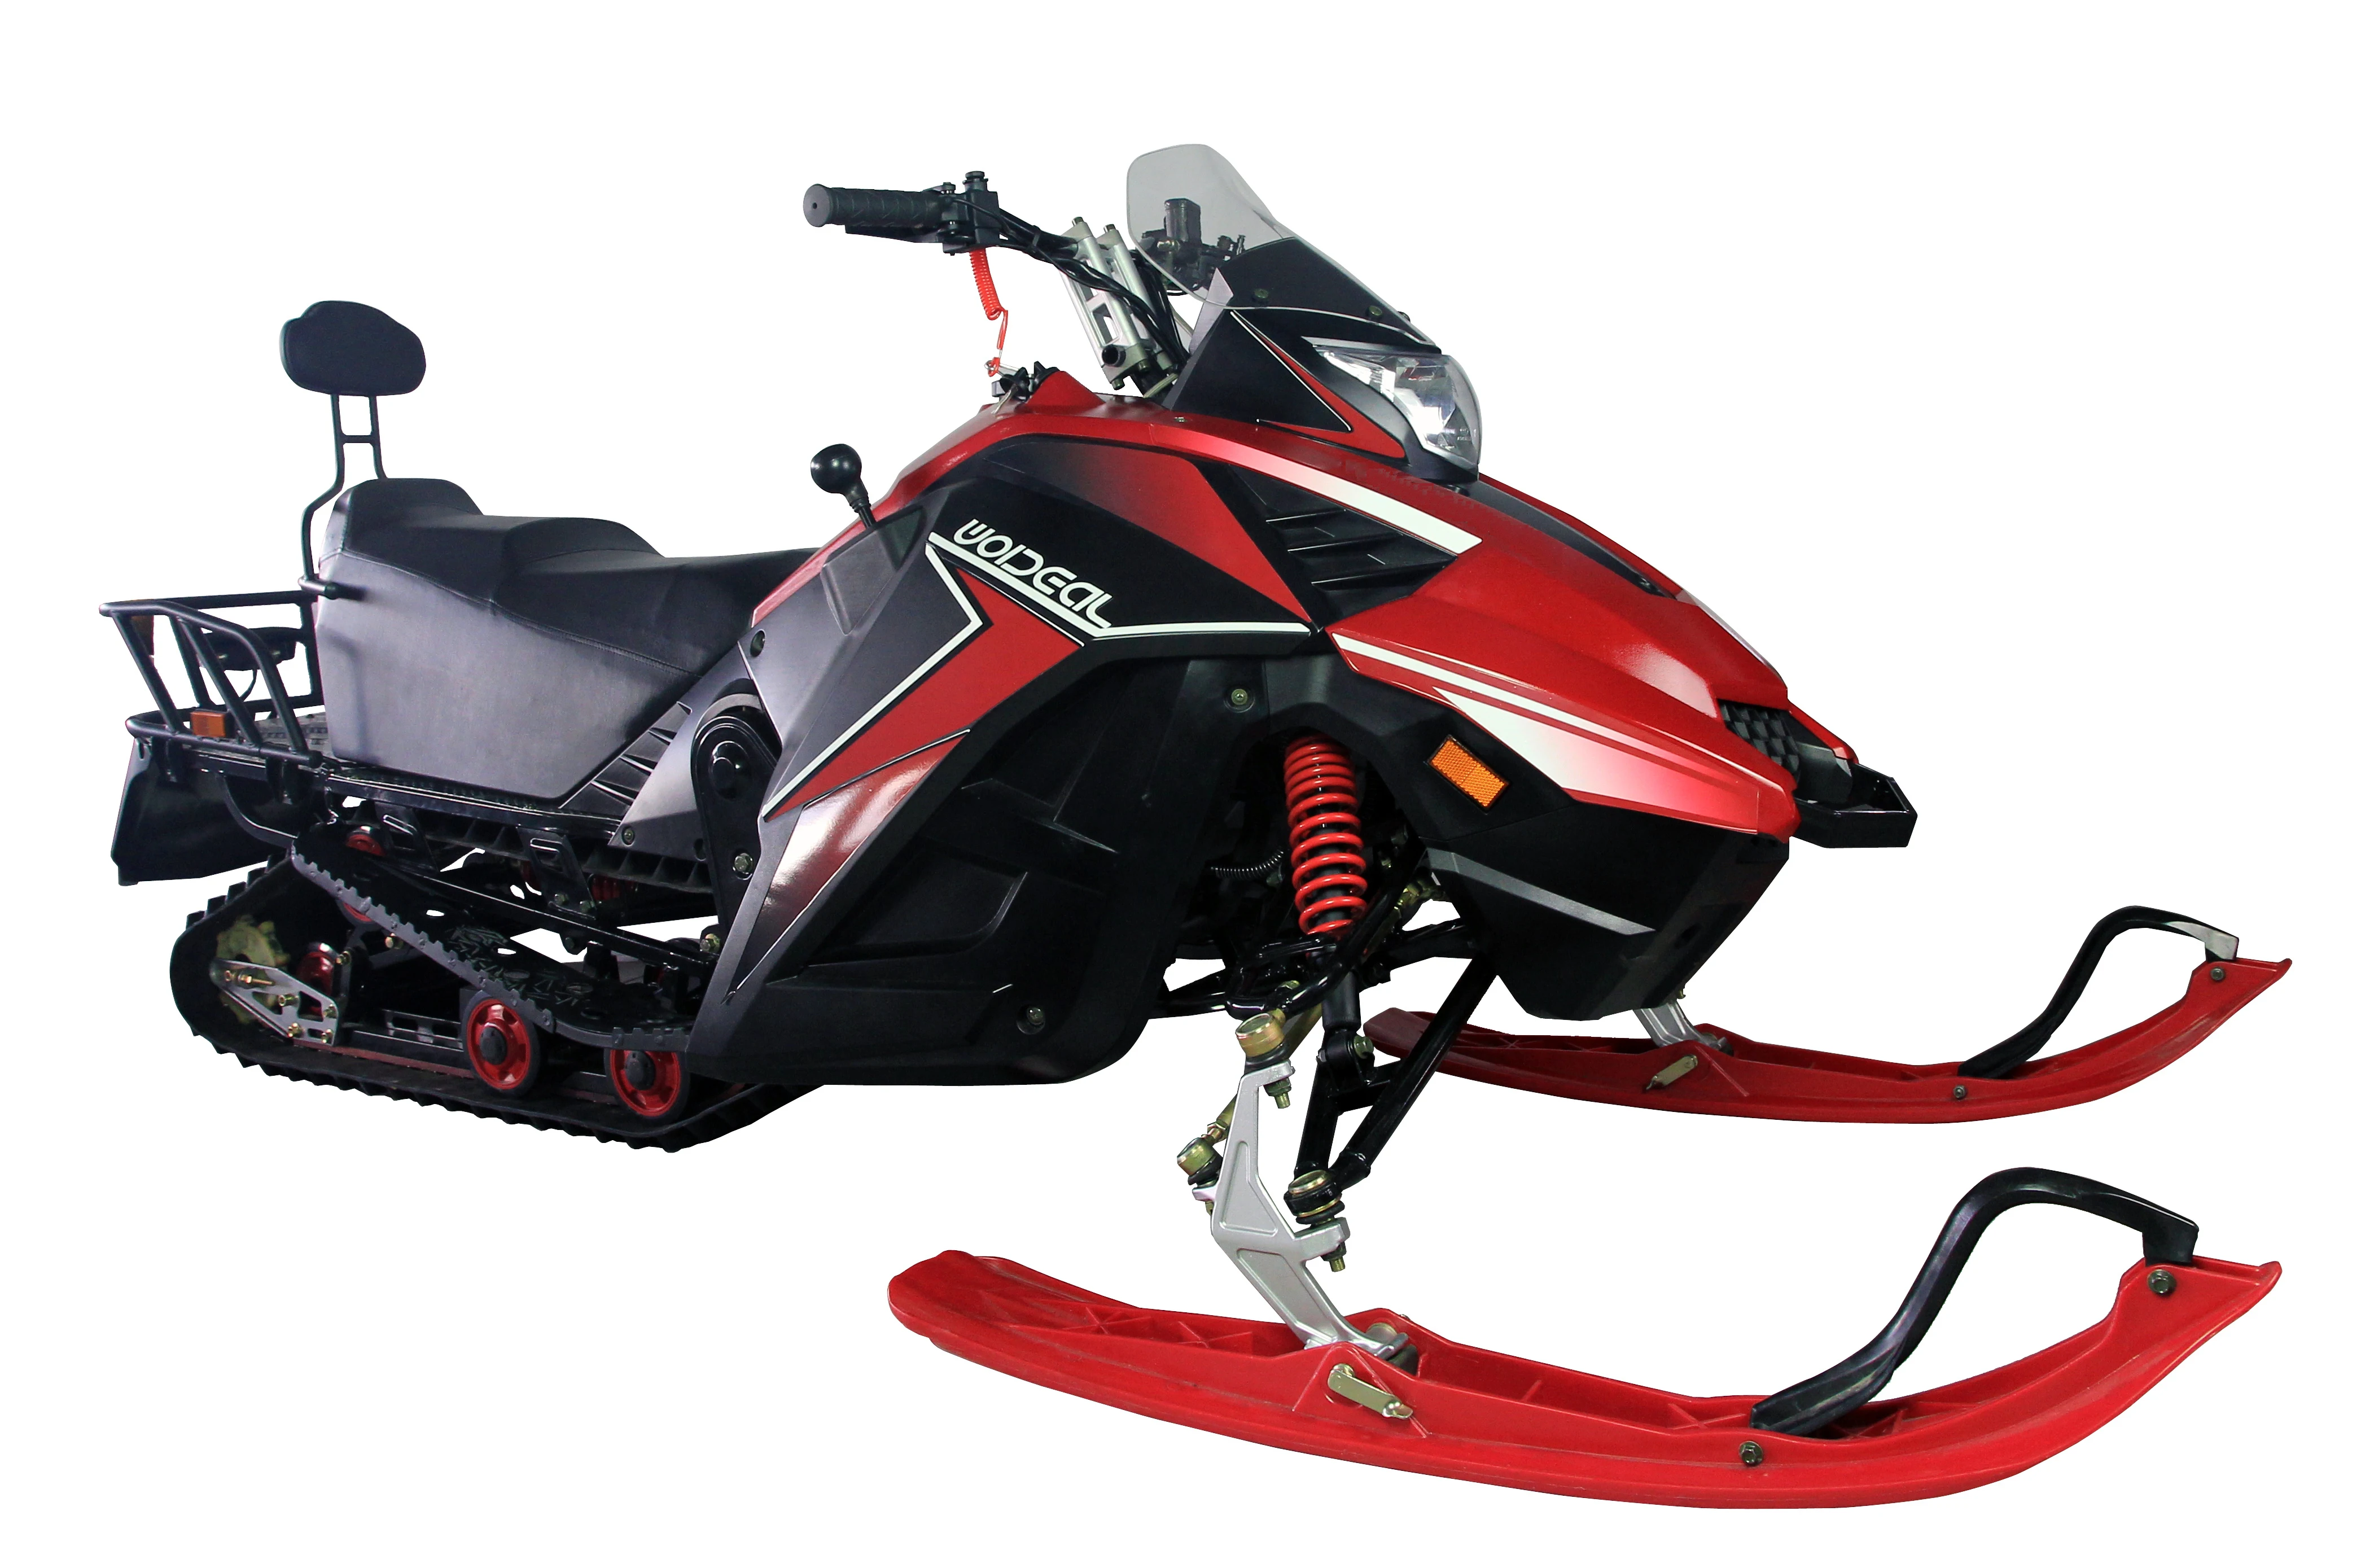 Lextra Adults Snowmobiles Chinese Children Snowmobile 150cc Snowscooter Snowmobile Snow Mobile Snow Vehicle